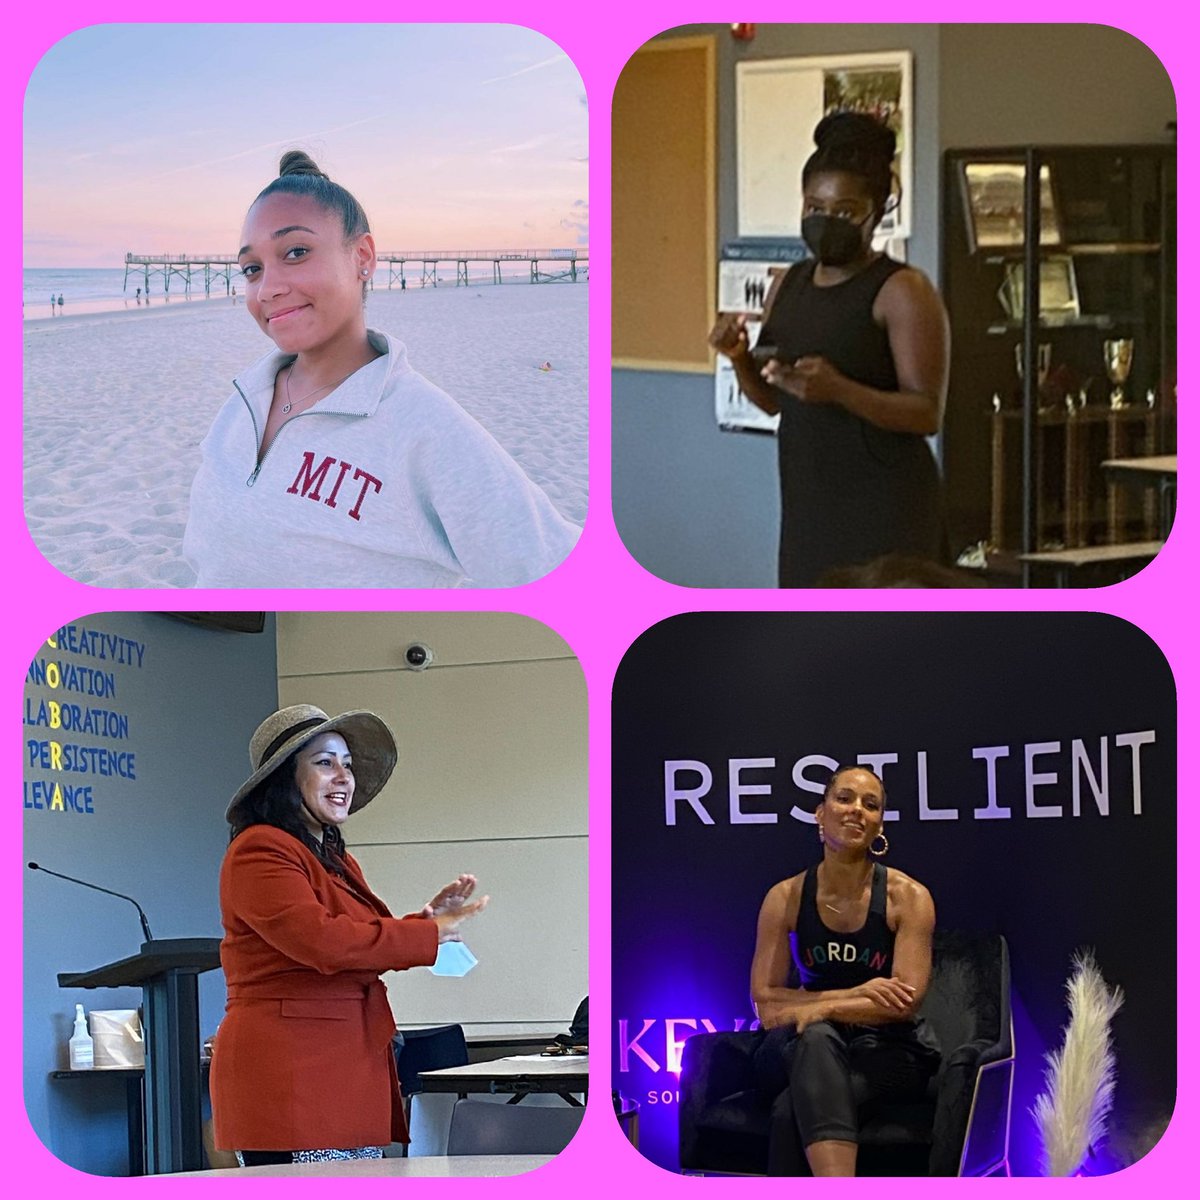 This week, I was inspired to be Resilient, Challenge status quo, Strive to be the greatest educator I can be, and no matter what- always be Me, because I Am Enough! Thank you @aliciakeys, @Comunidaddedur1, @BettinaUmstead, and my beautiful daughter Nina for your Inspiration.